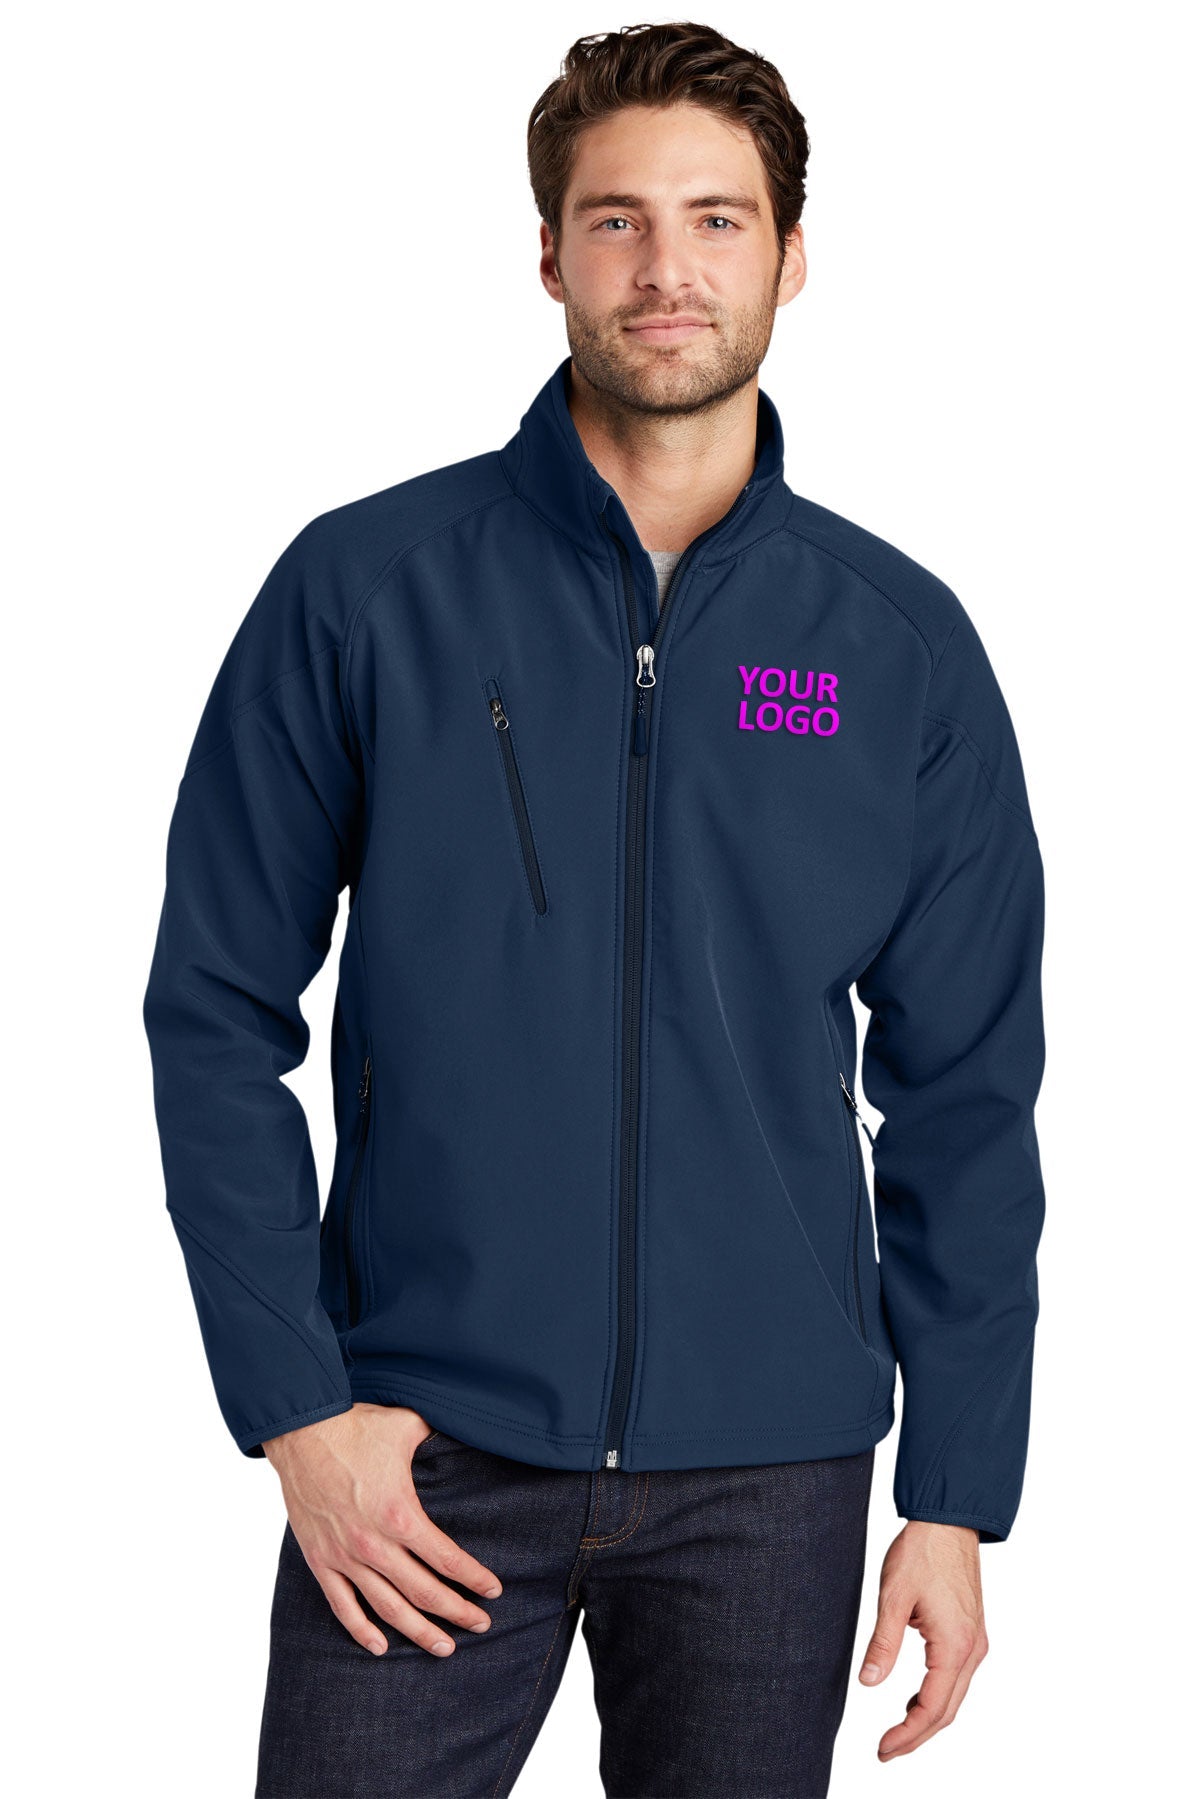 port authority insignia blue j705 embroidered team jackets